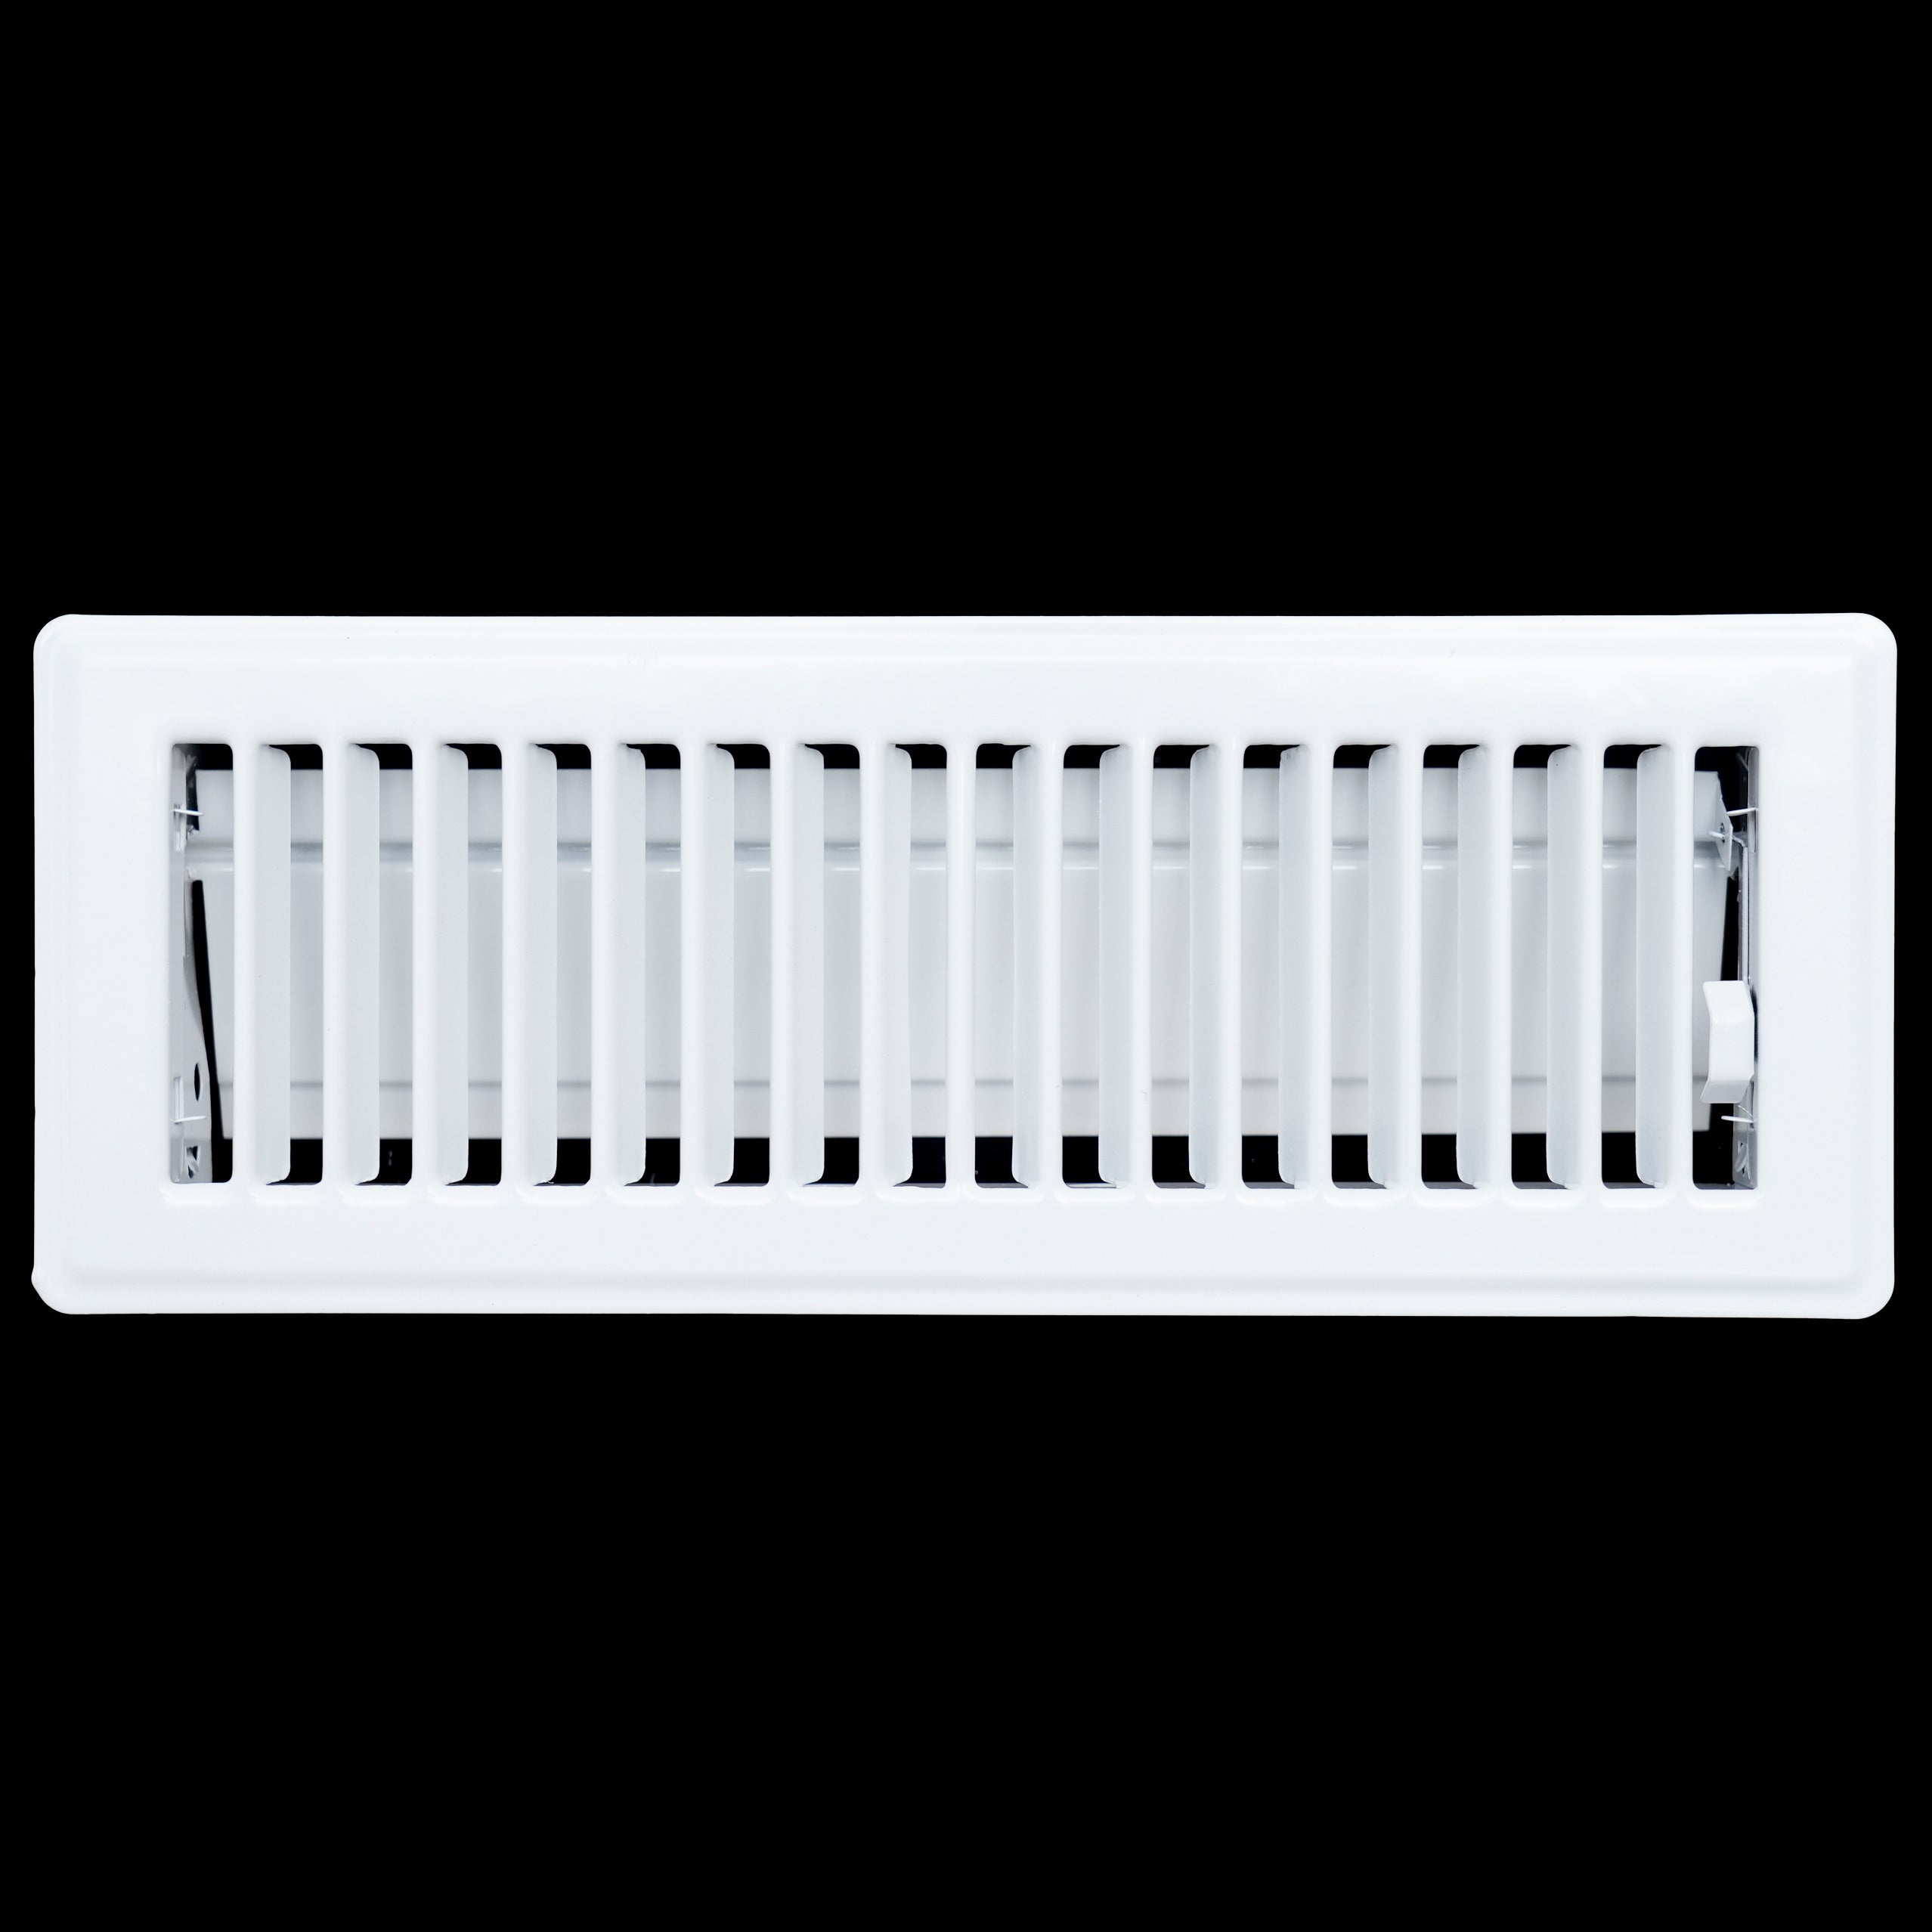 airgrilles 3" x 10" floor register with louvered design   heavy duty walkable design with damper   floor vent grille   easy to adjust air supply lever   white hnd-flg-wh-3x10  - 1